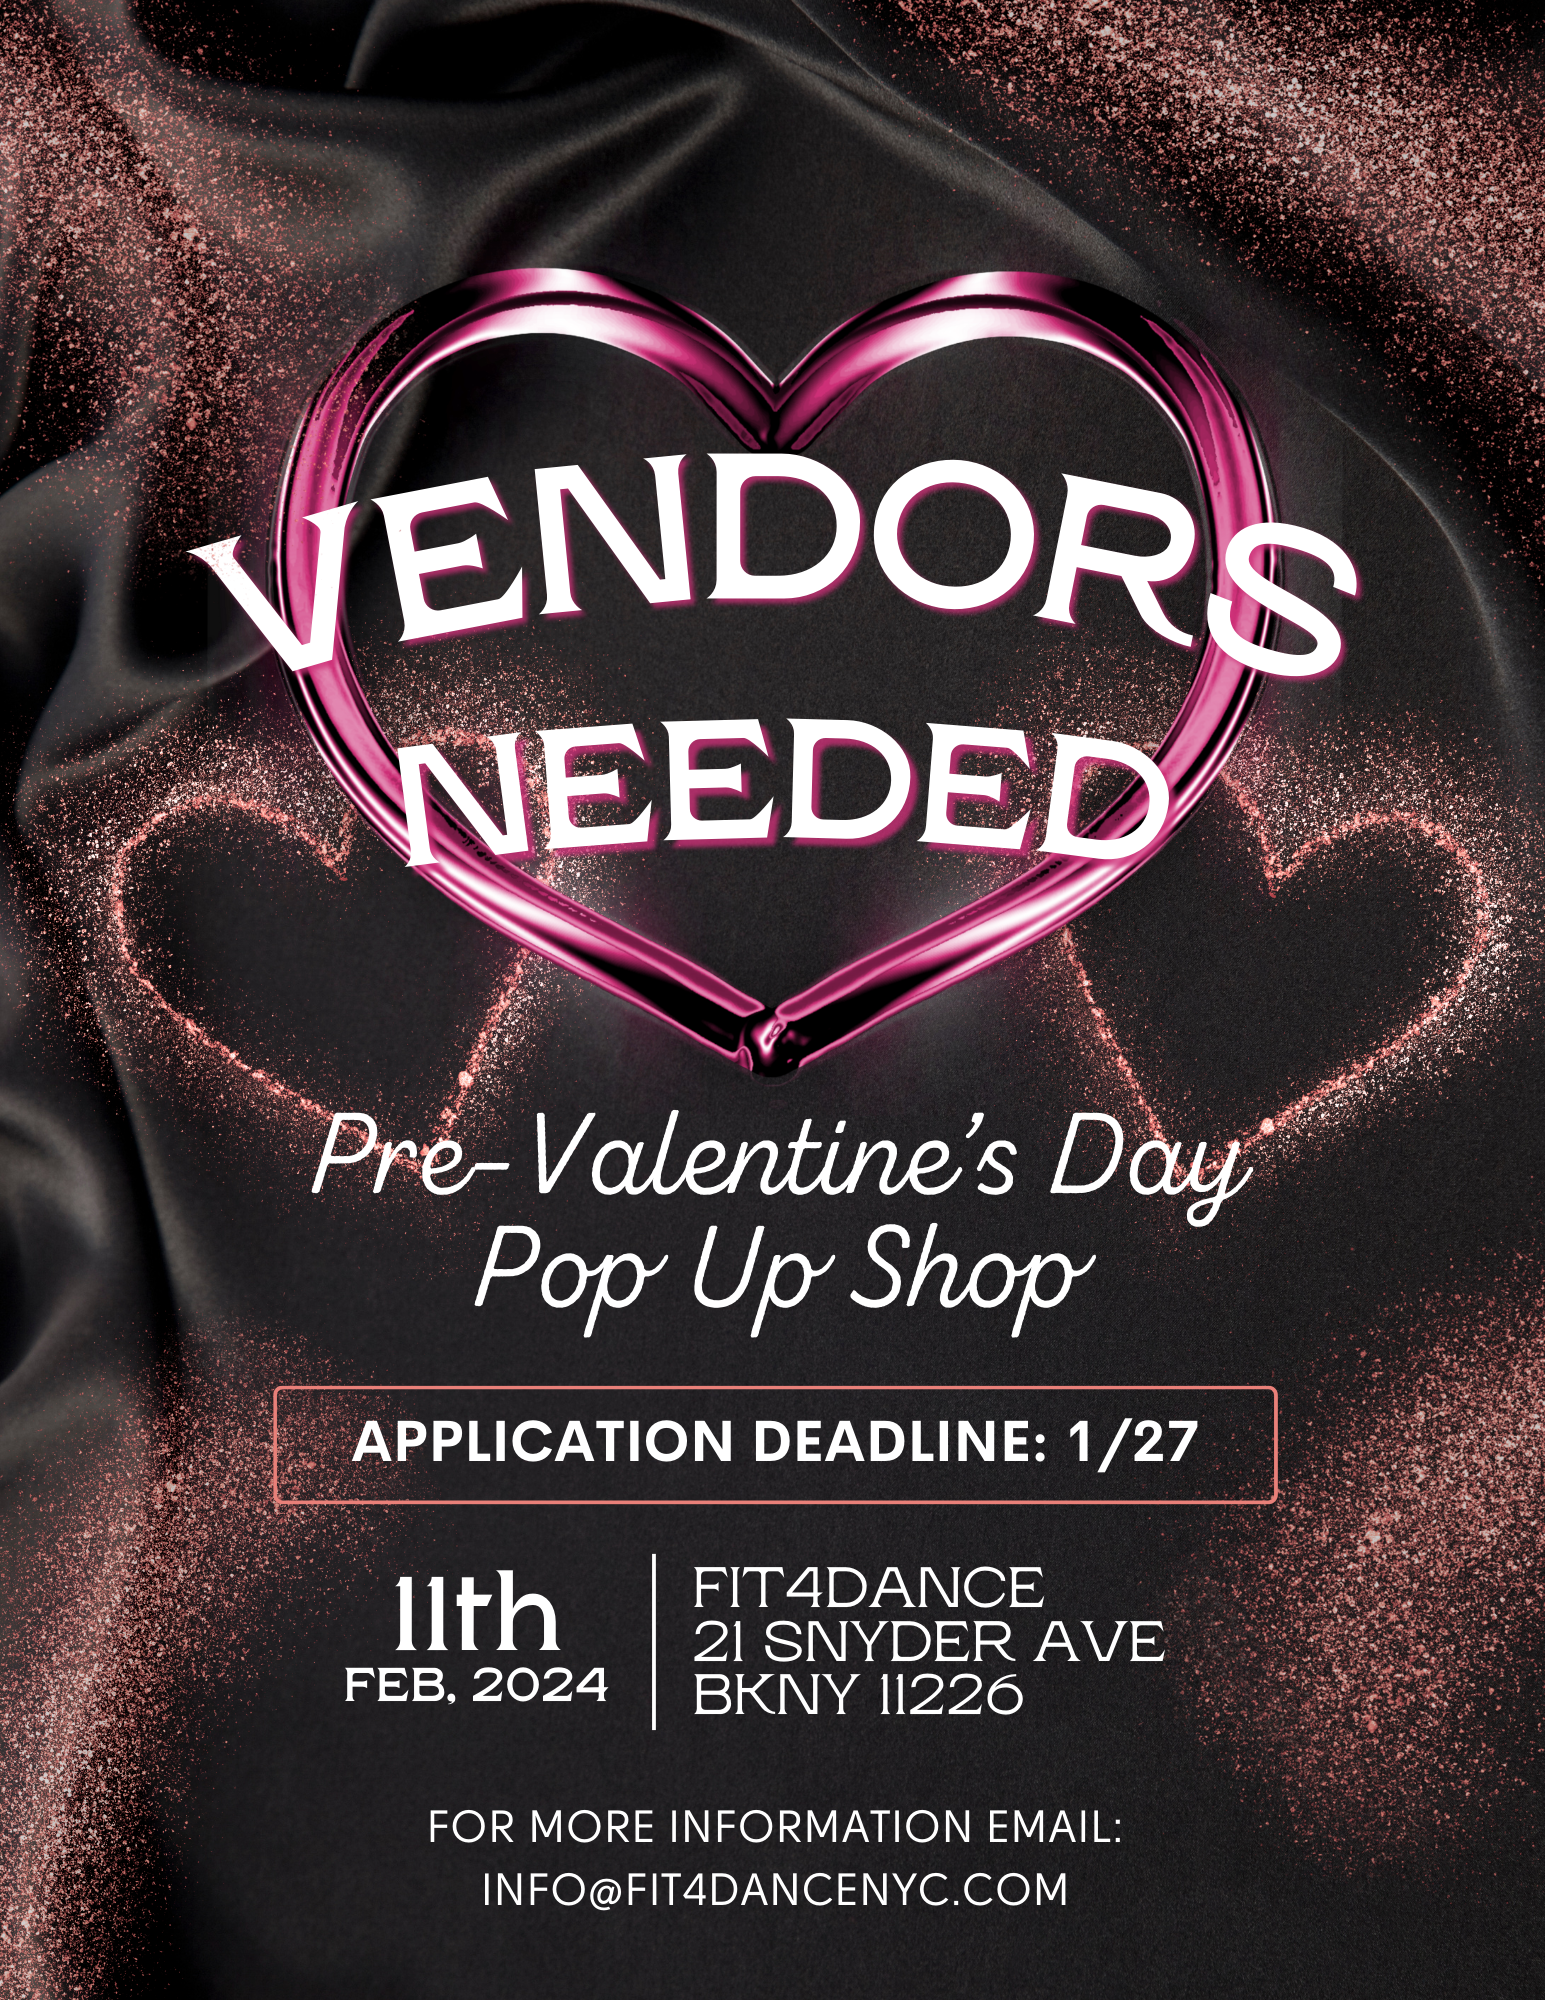 Apply to be a Vendor at our Pre-Valentine's Day Pop Up Shop!